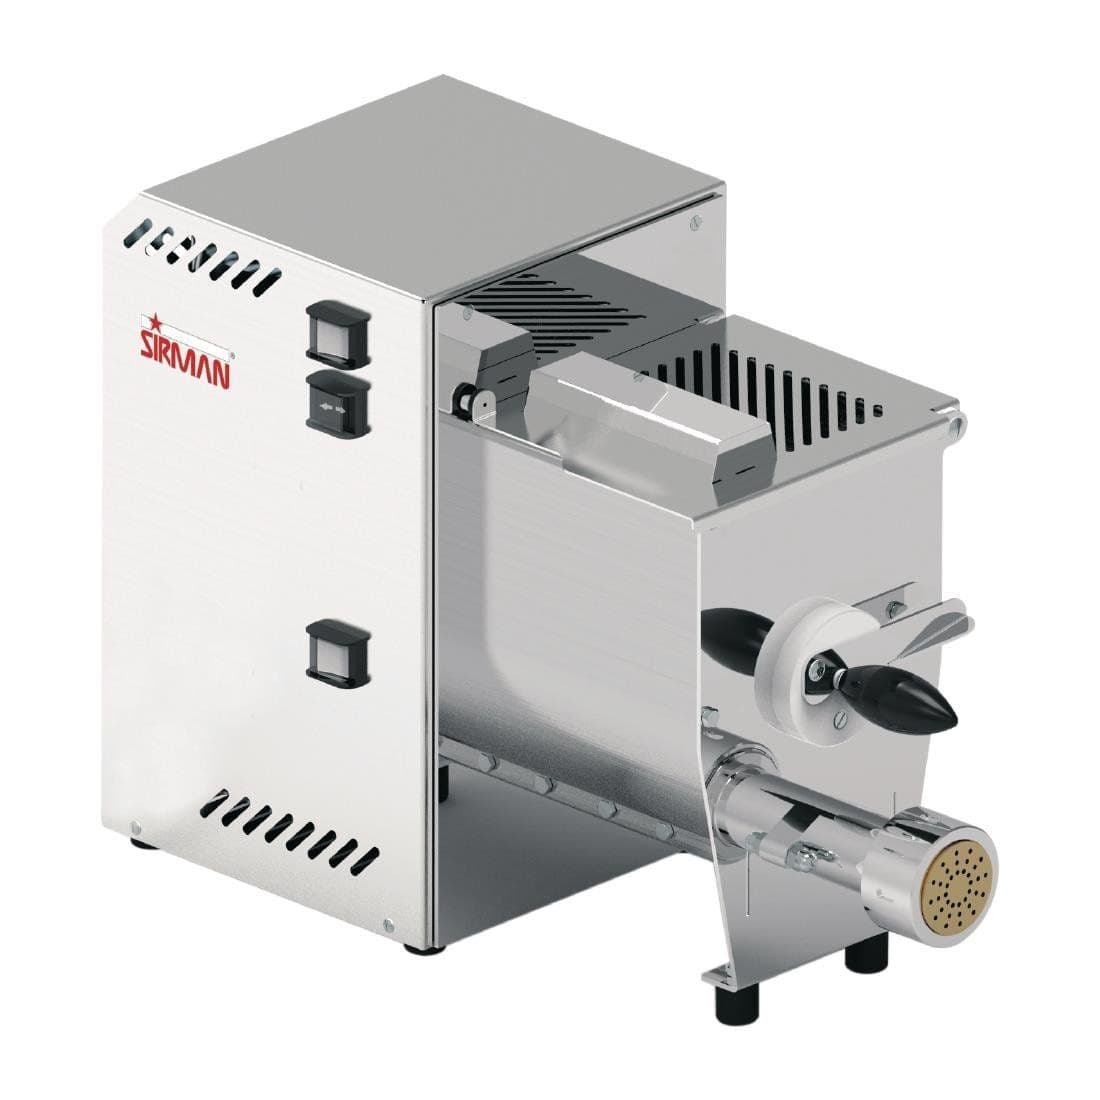 DM688-LIN Sirman Sinfonia 2 Pasta Machine with Linguine 3x1.6mm Die JD Catering Equipment Solutions Ltd